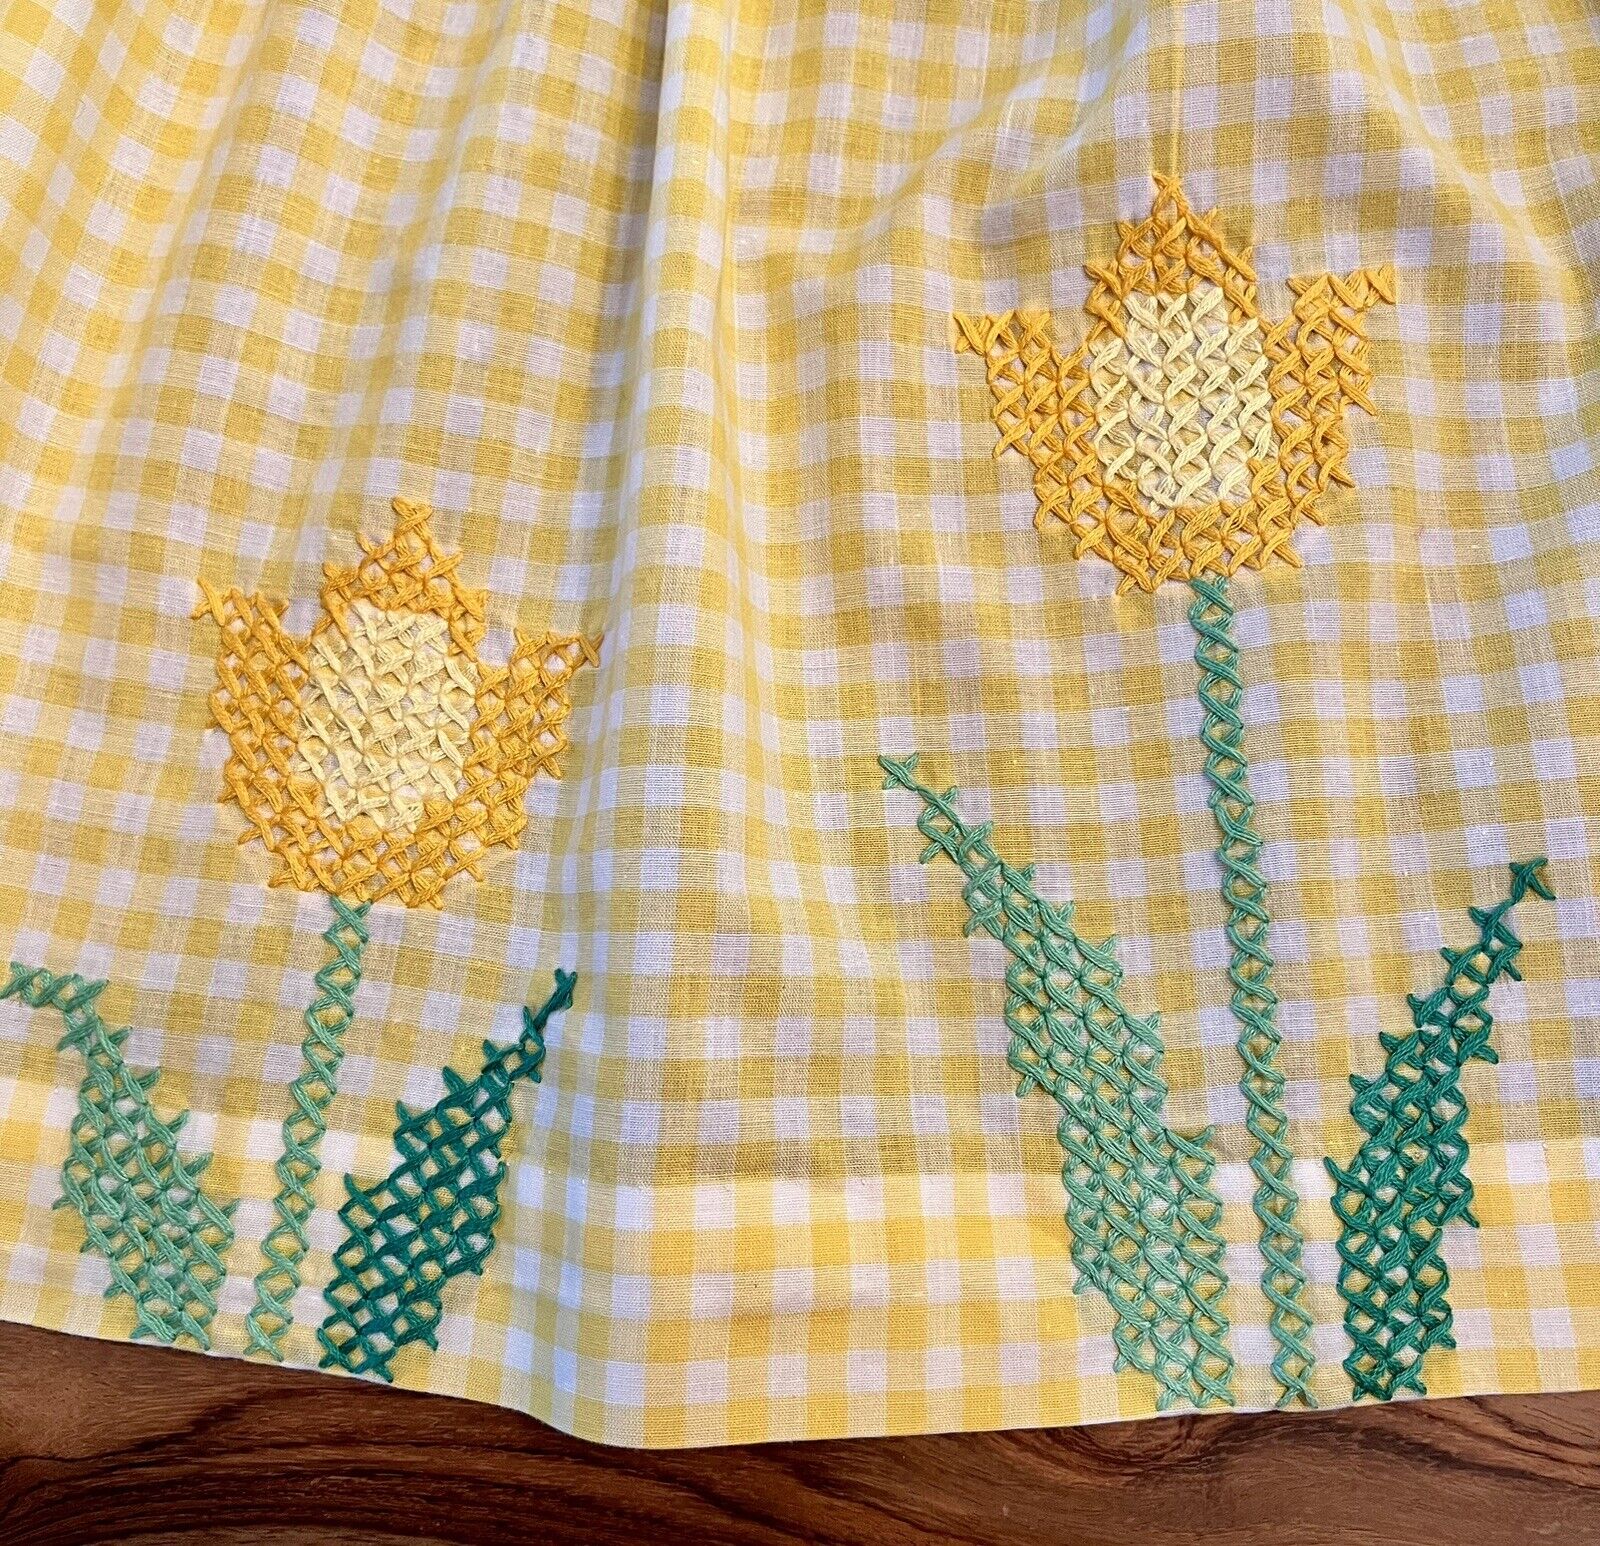 Vintage Yellow Gingham Cotton Apron With Embroidered Sunflowers